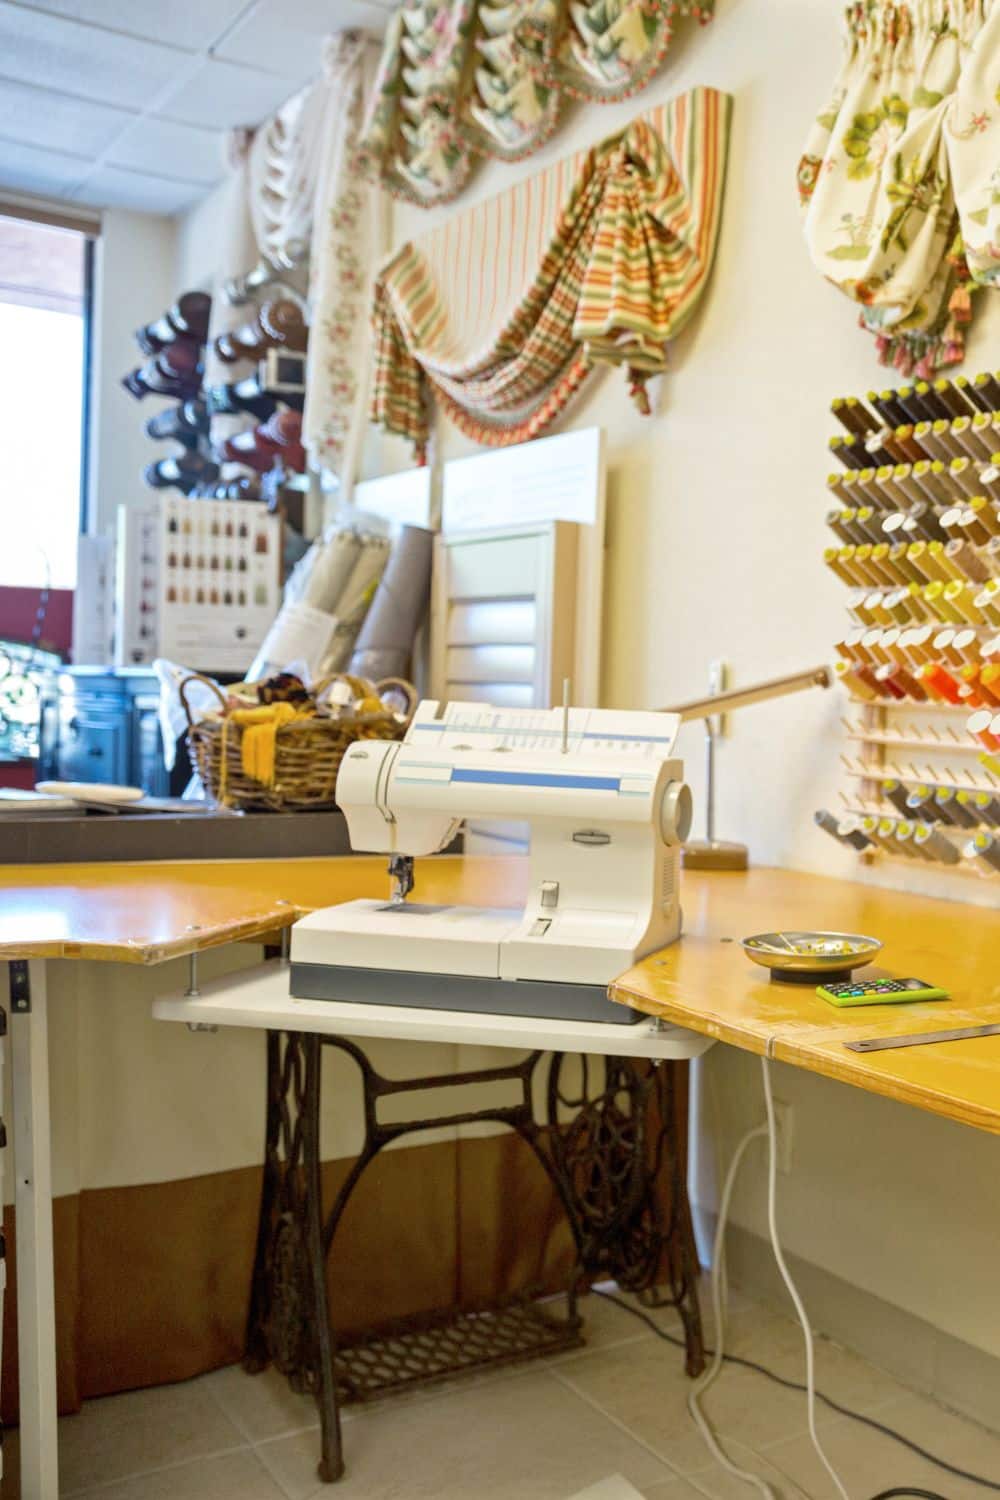 sewing room where practicality meets creativity